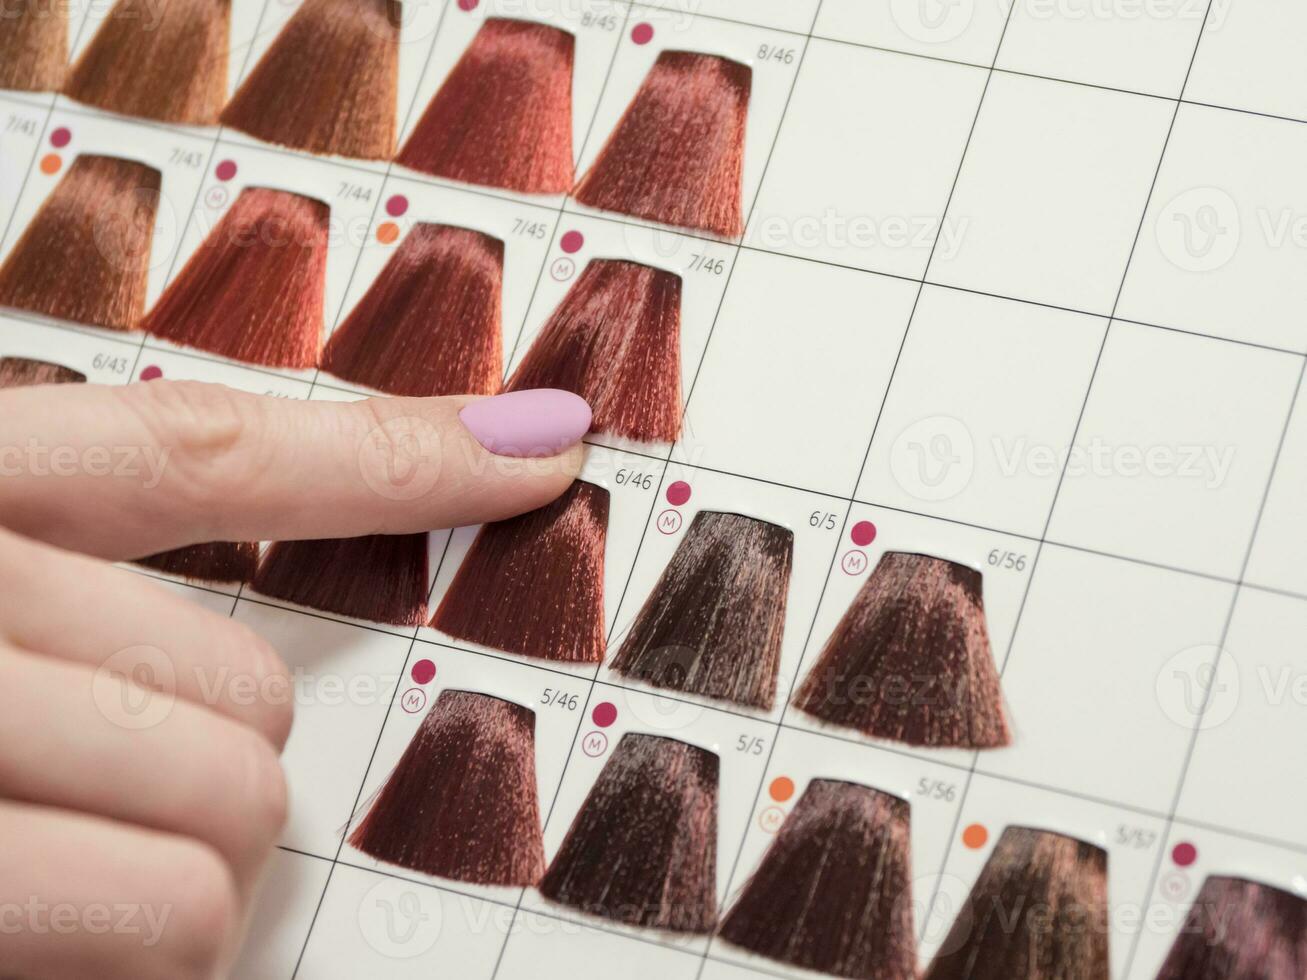 Hair dye palette, color selection for hair coloring. photo